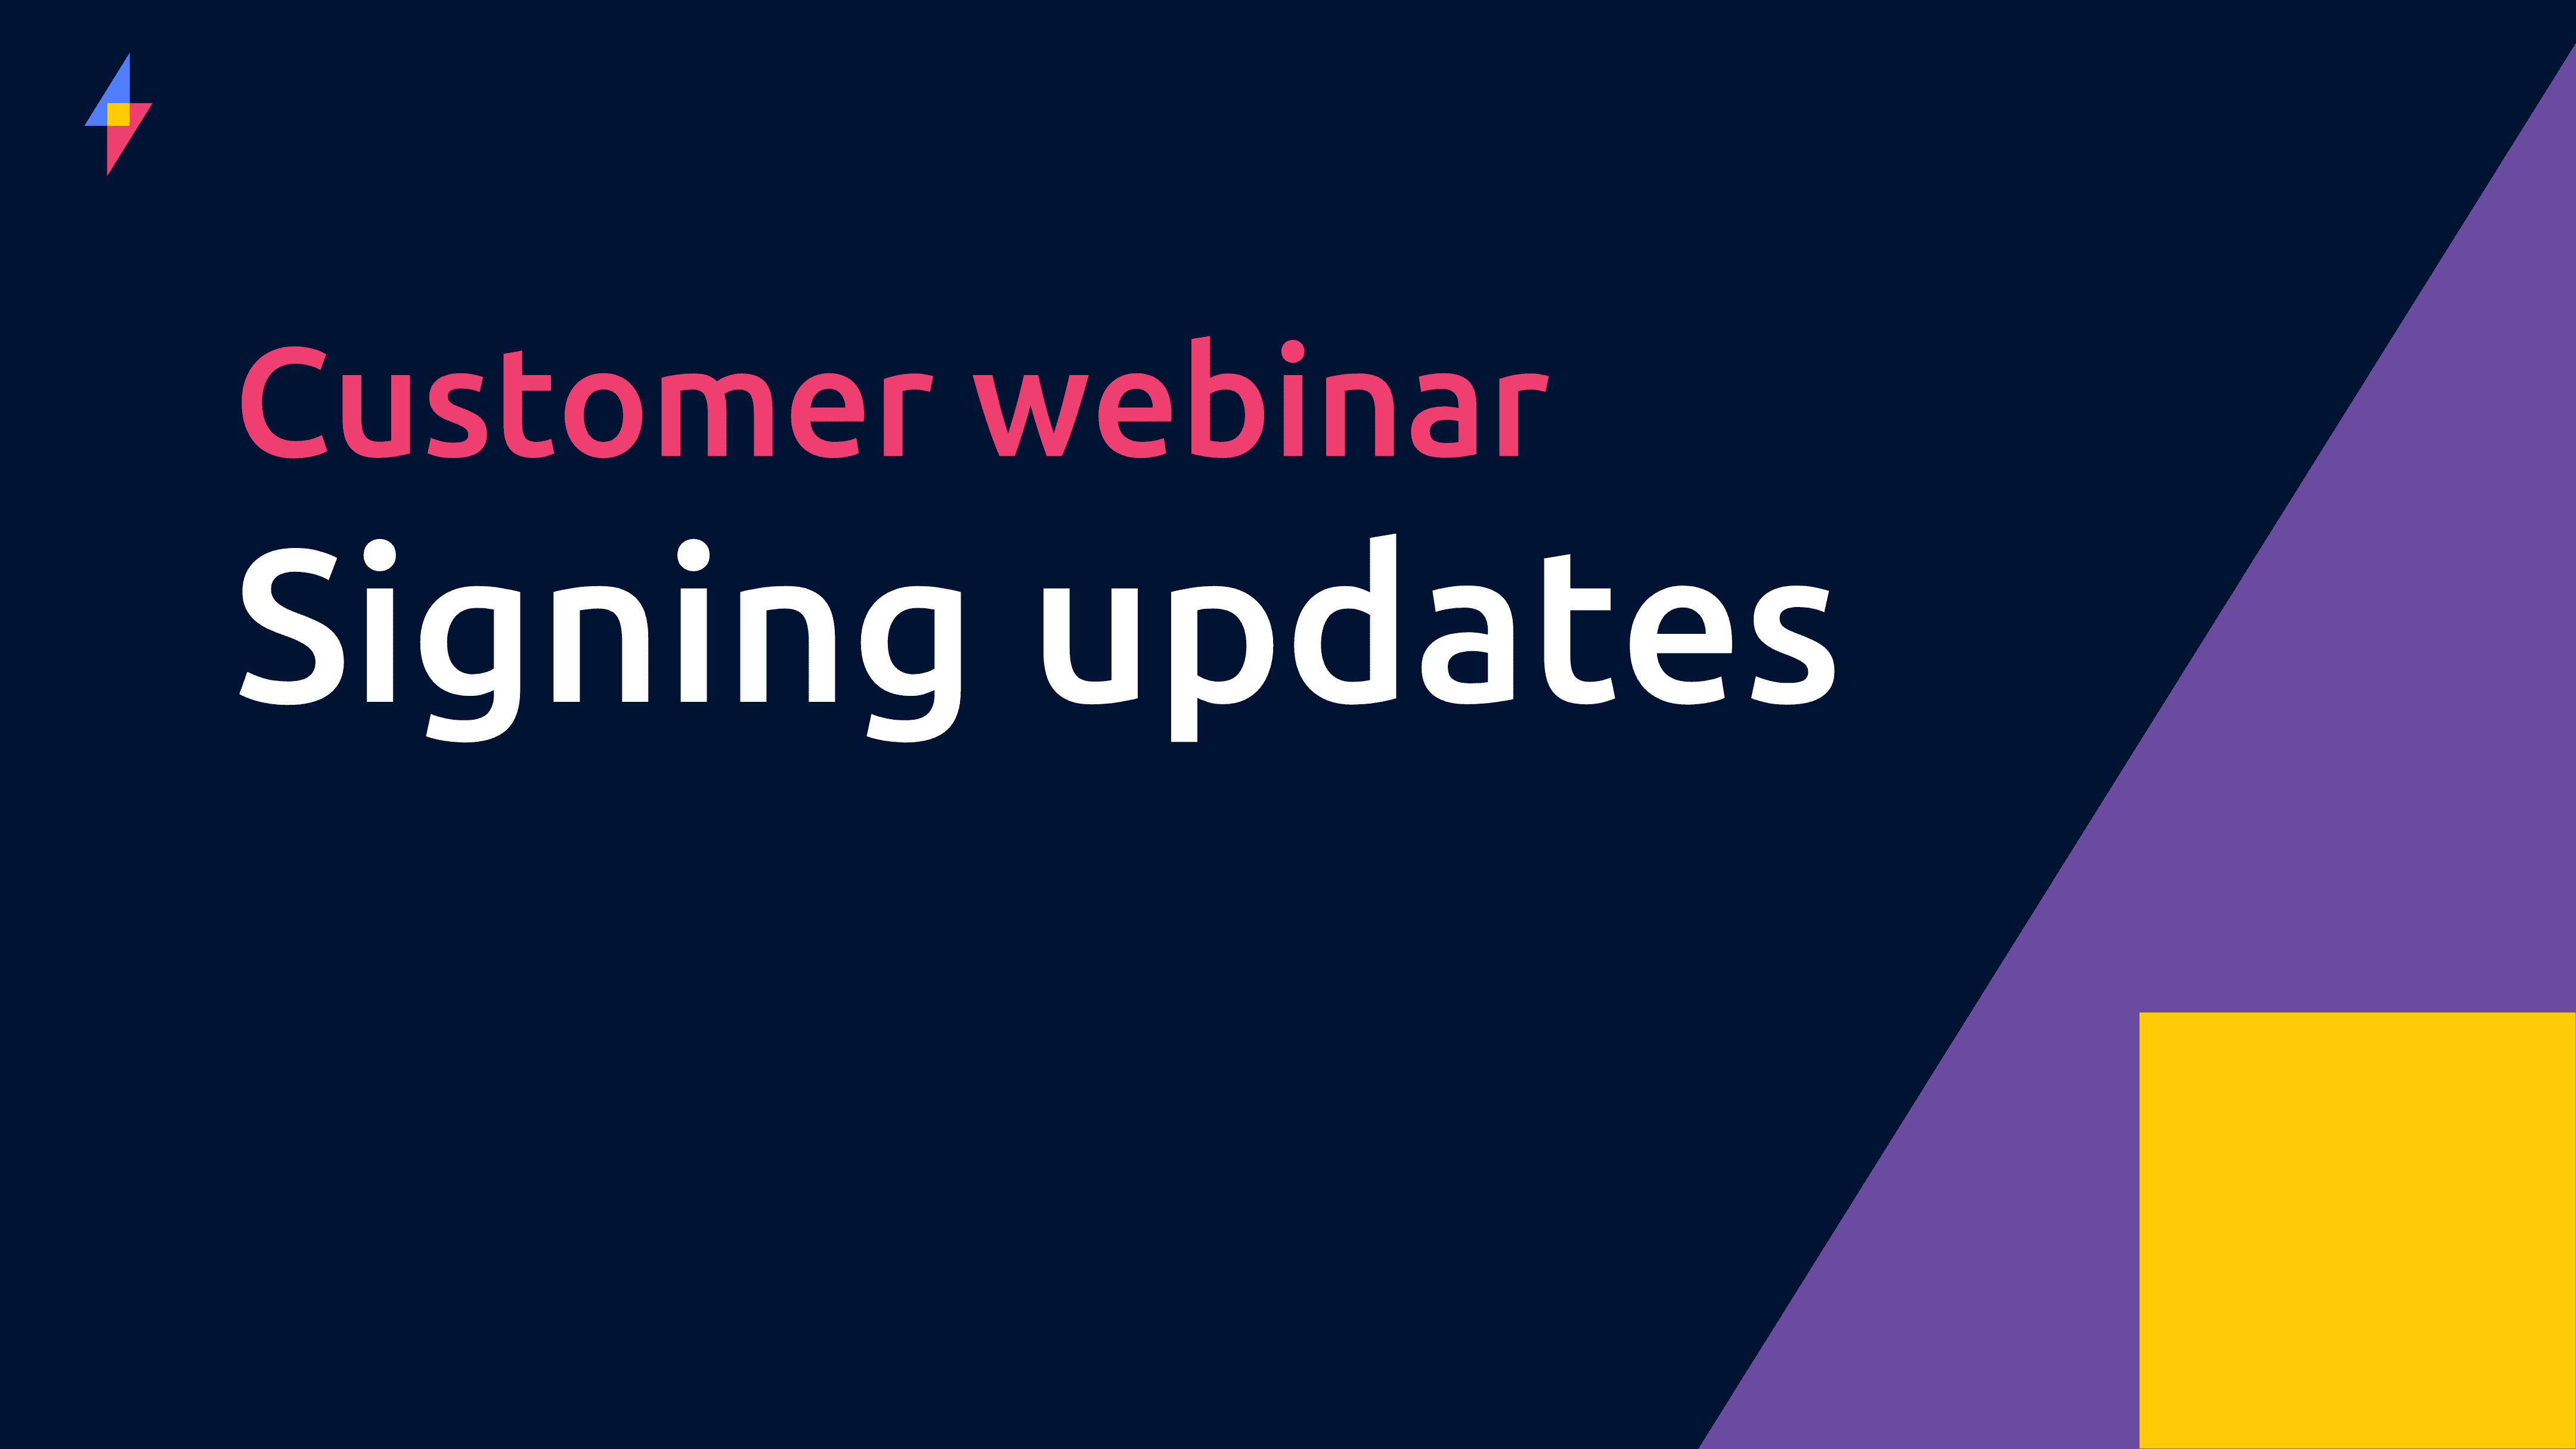 Image showing the text customer webinar - signing updates